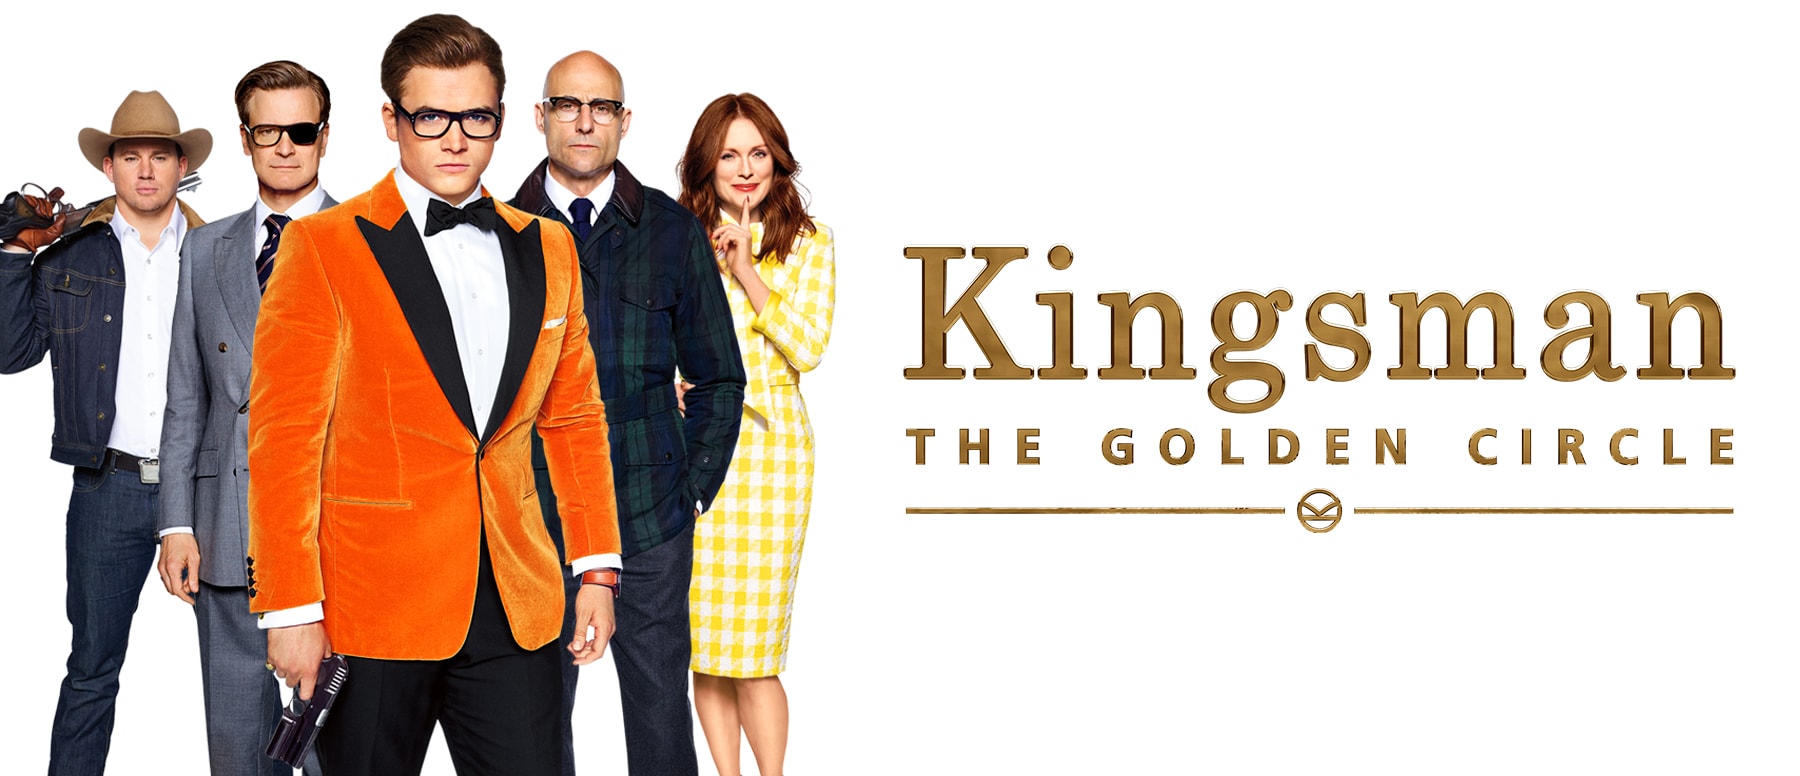 Movie of the week: buy “Kingsman: The Golden Circle”, with Colin Firth and Julianne Moore, for R $ 9.90!